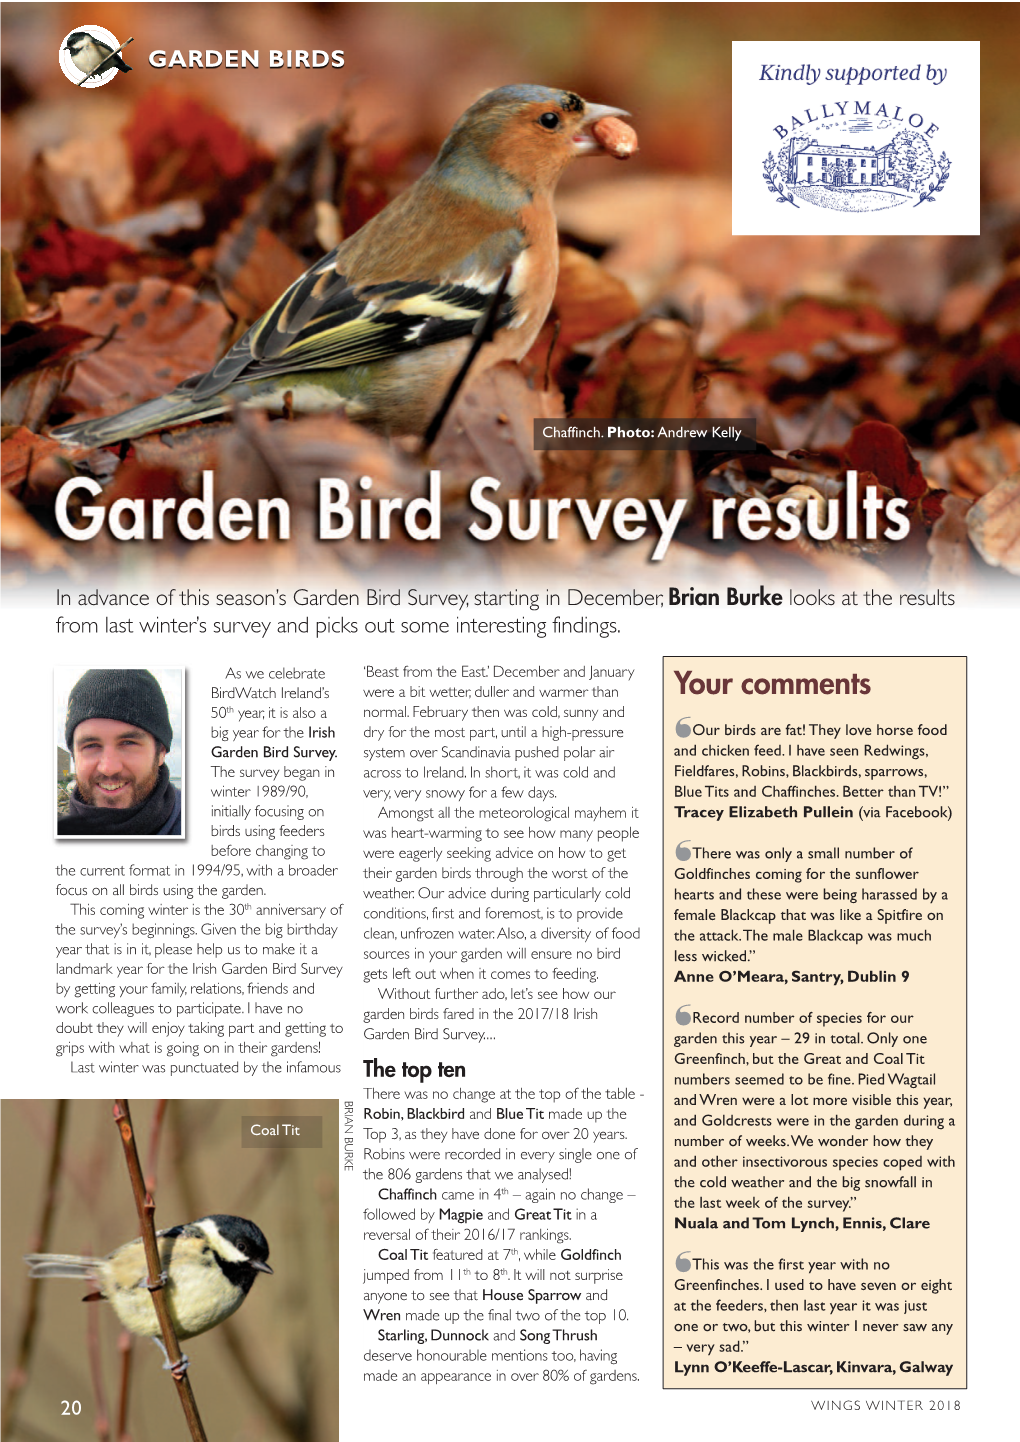 To Read the Results from the 2017/18 Irish Garden Bird Survey